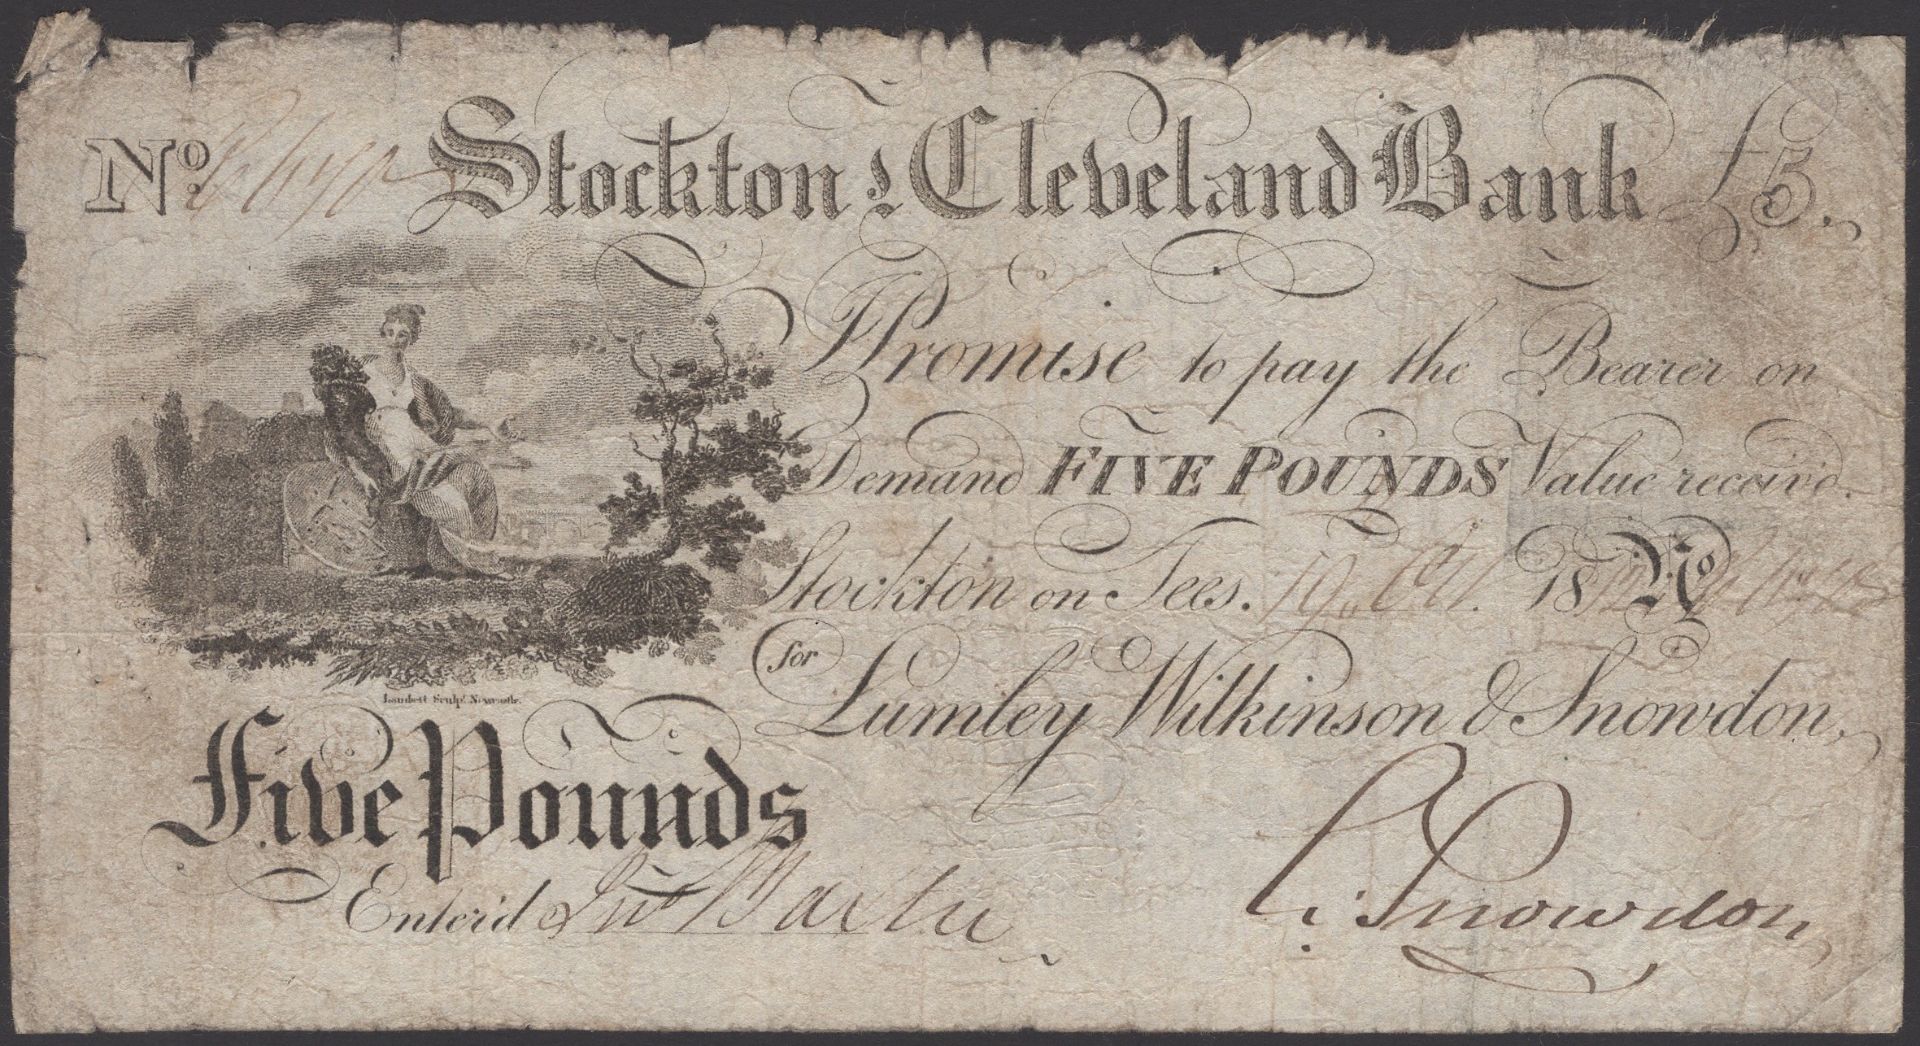 The Ivor Bridges Collection of Provincial Banknotes - Part One